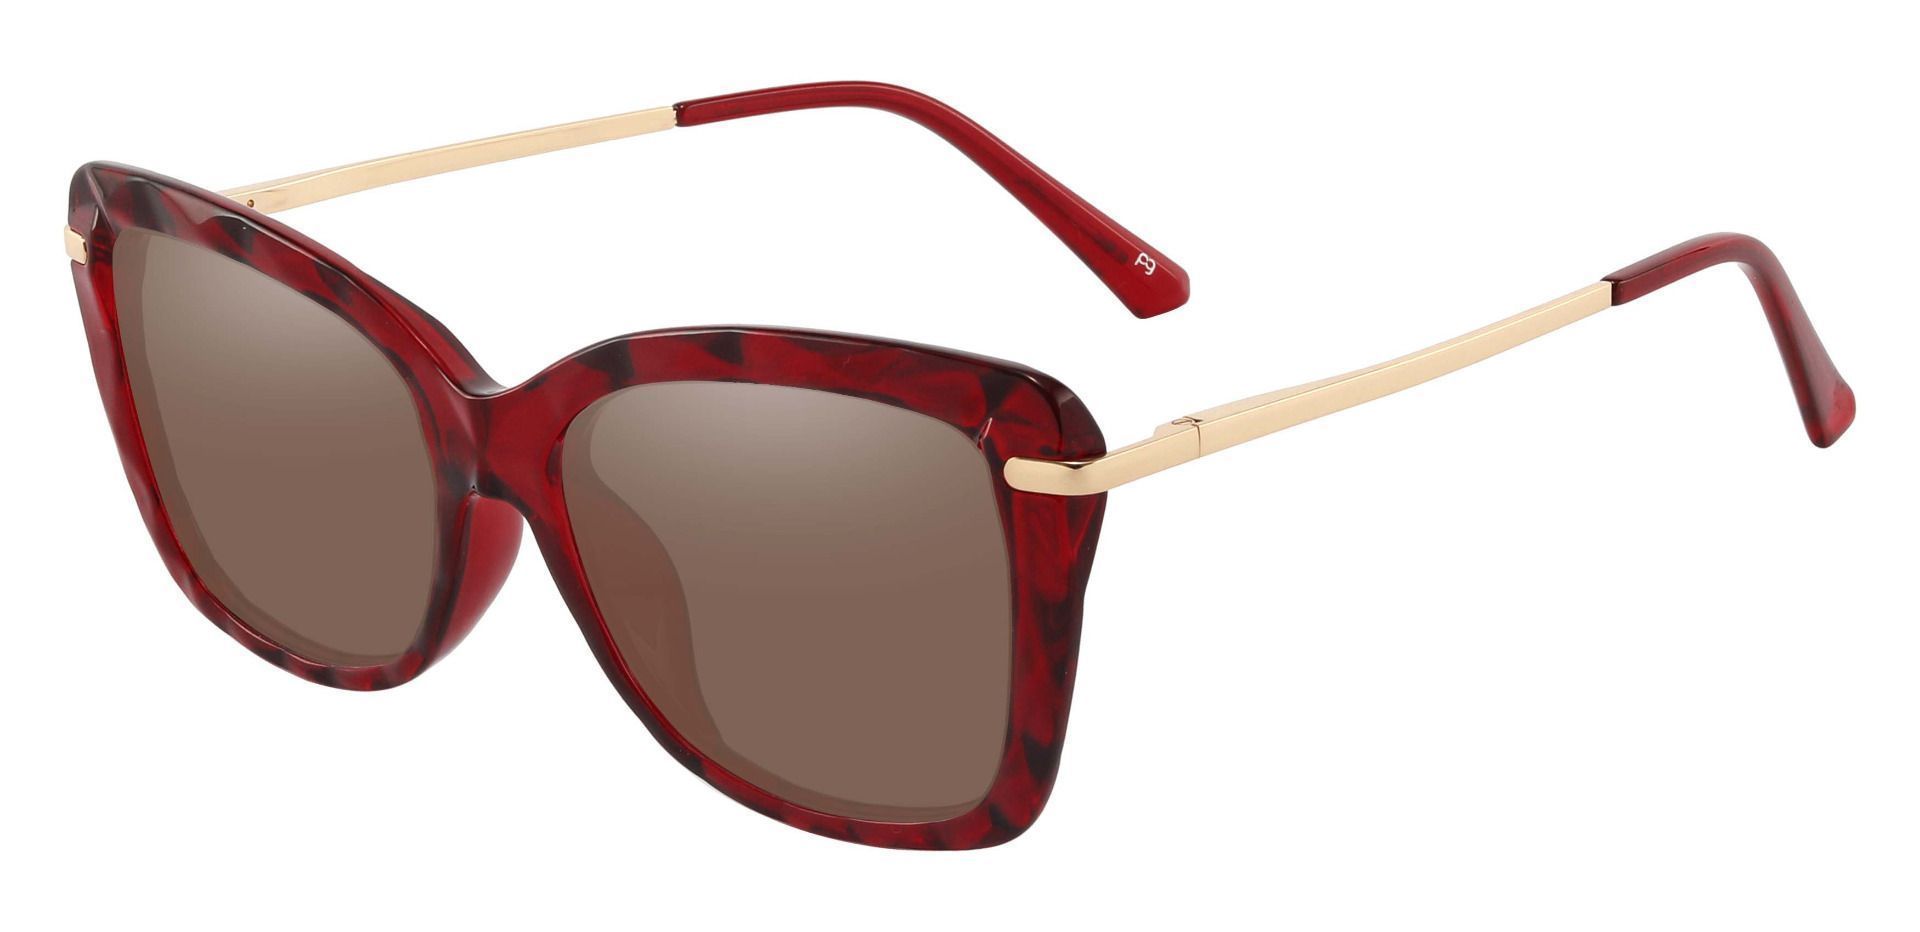 Shoshanna Rectangle Lined Bifocal Sunglasses - Red Frame With Brown Lenses